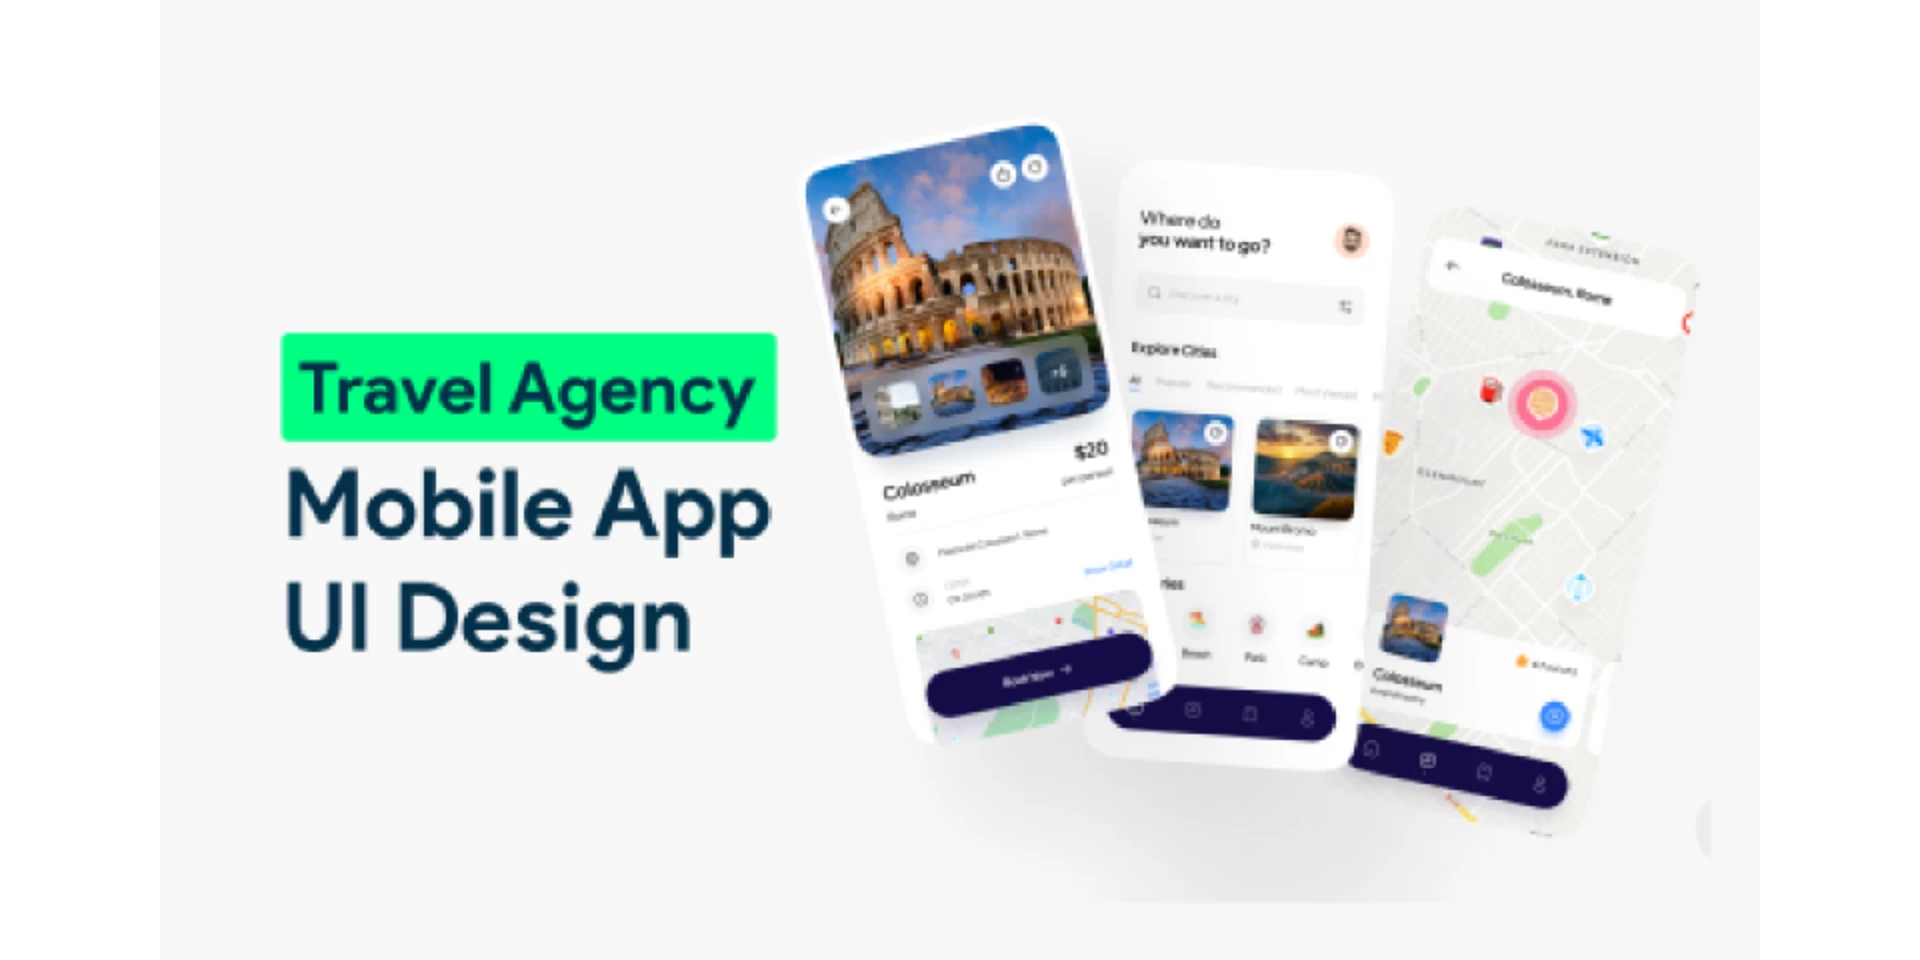 Travel Agency Mobile App UI Design for Figma and Adobe XD